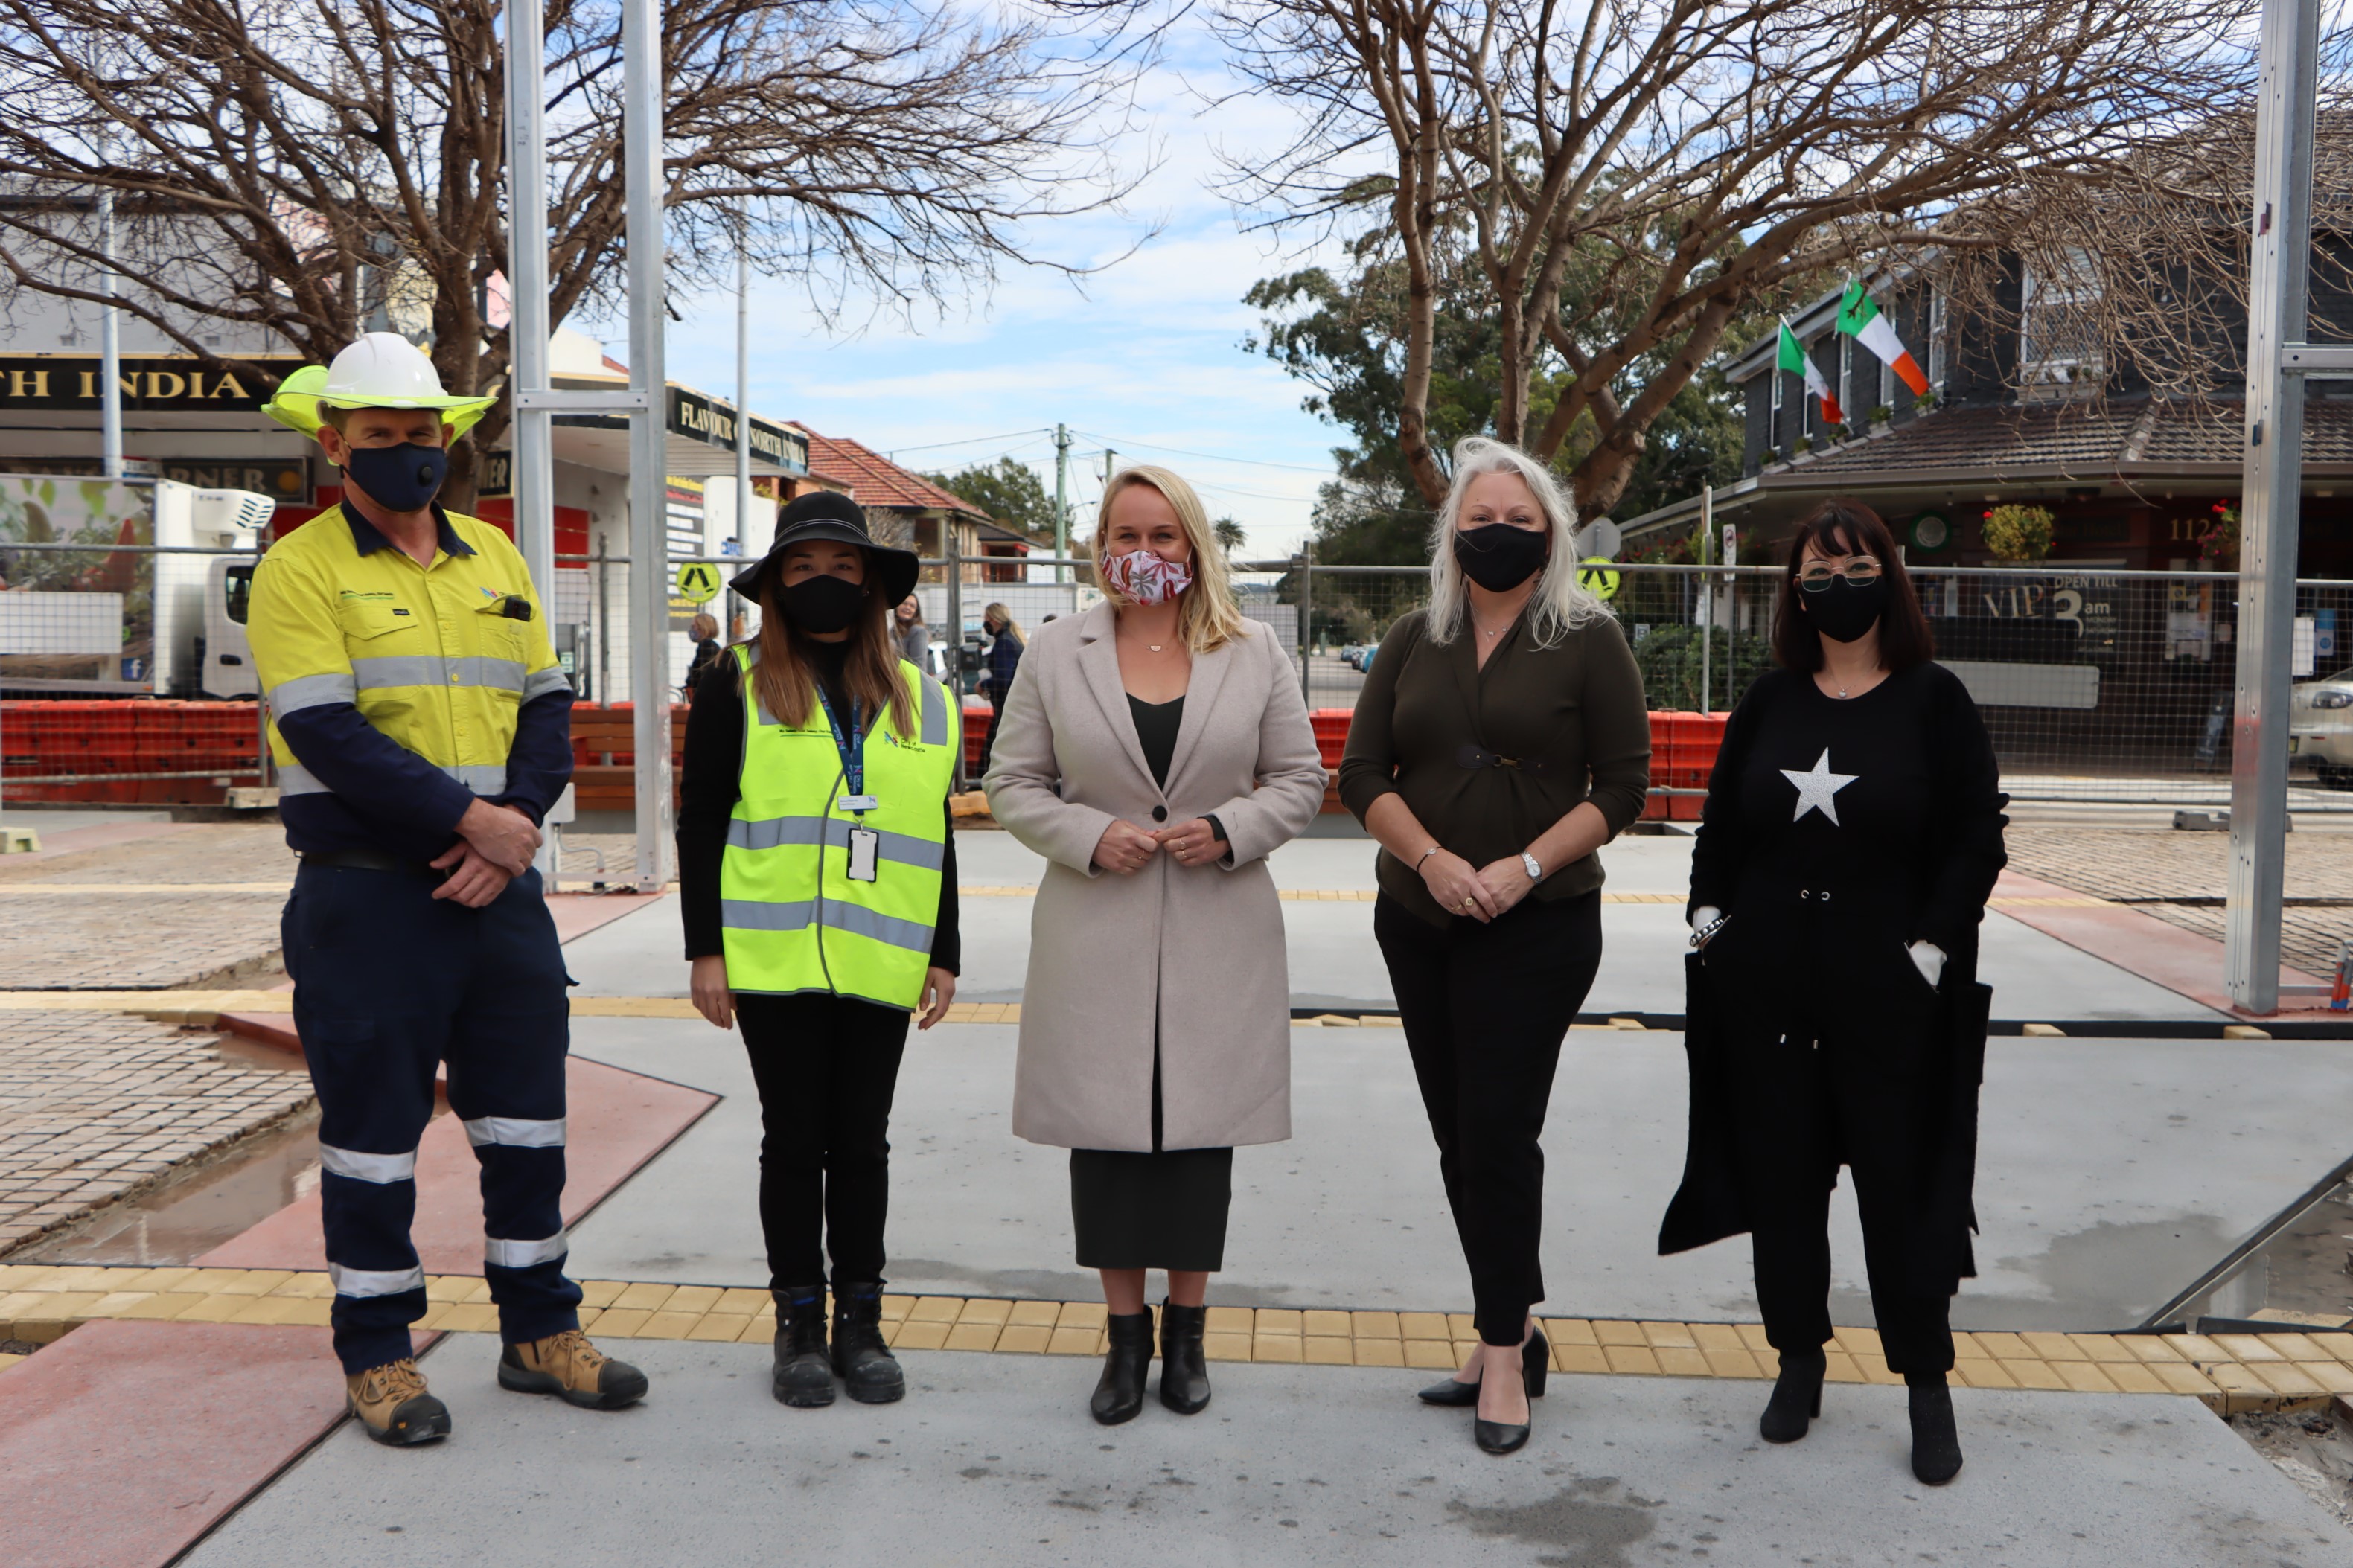 Lord-Mayor-Nuatali-Nelmes-with-Councillor-Carol-Duncan-Janice-Musumeci-from-the-Hamilton-BIA-and-City-of-Newcastle-staff-at-James-Street-Plaza.JPG